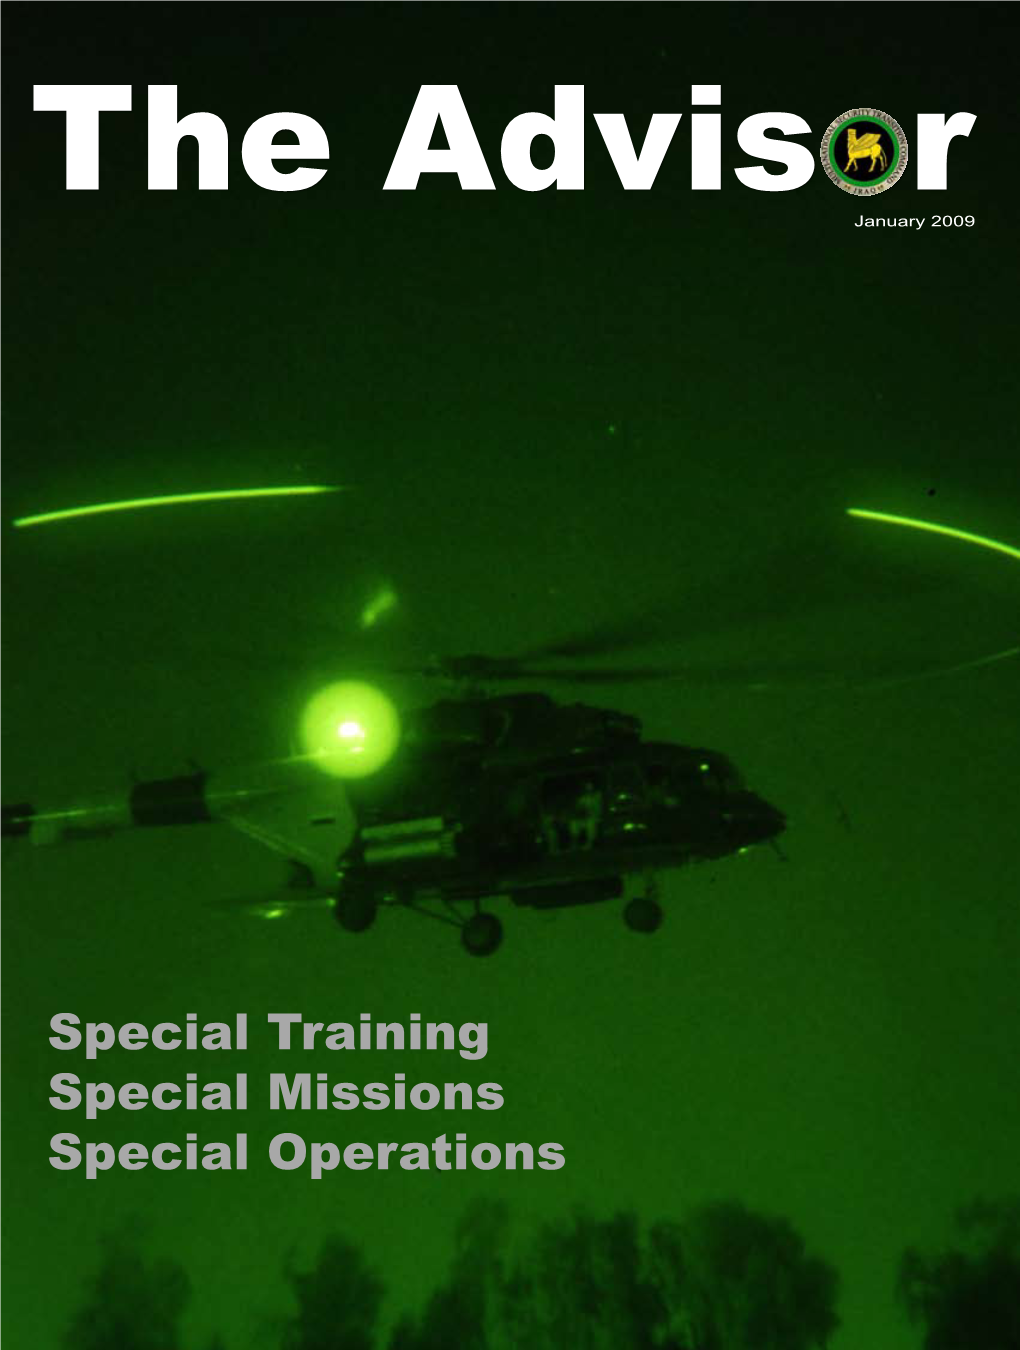 Special Training Special Missions Special Operations INSIDE >> INSIDE the Advis R >> Volume 6 >> Issue 1